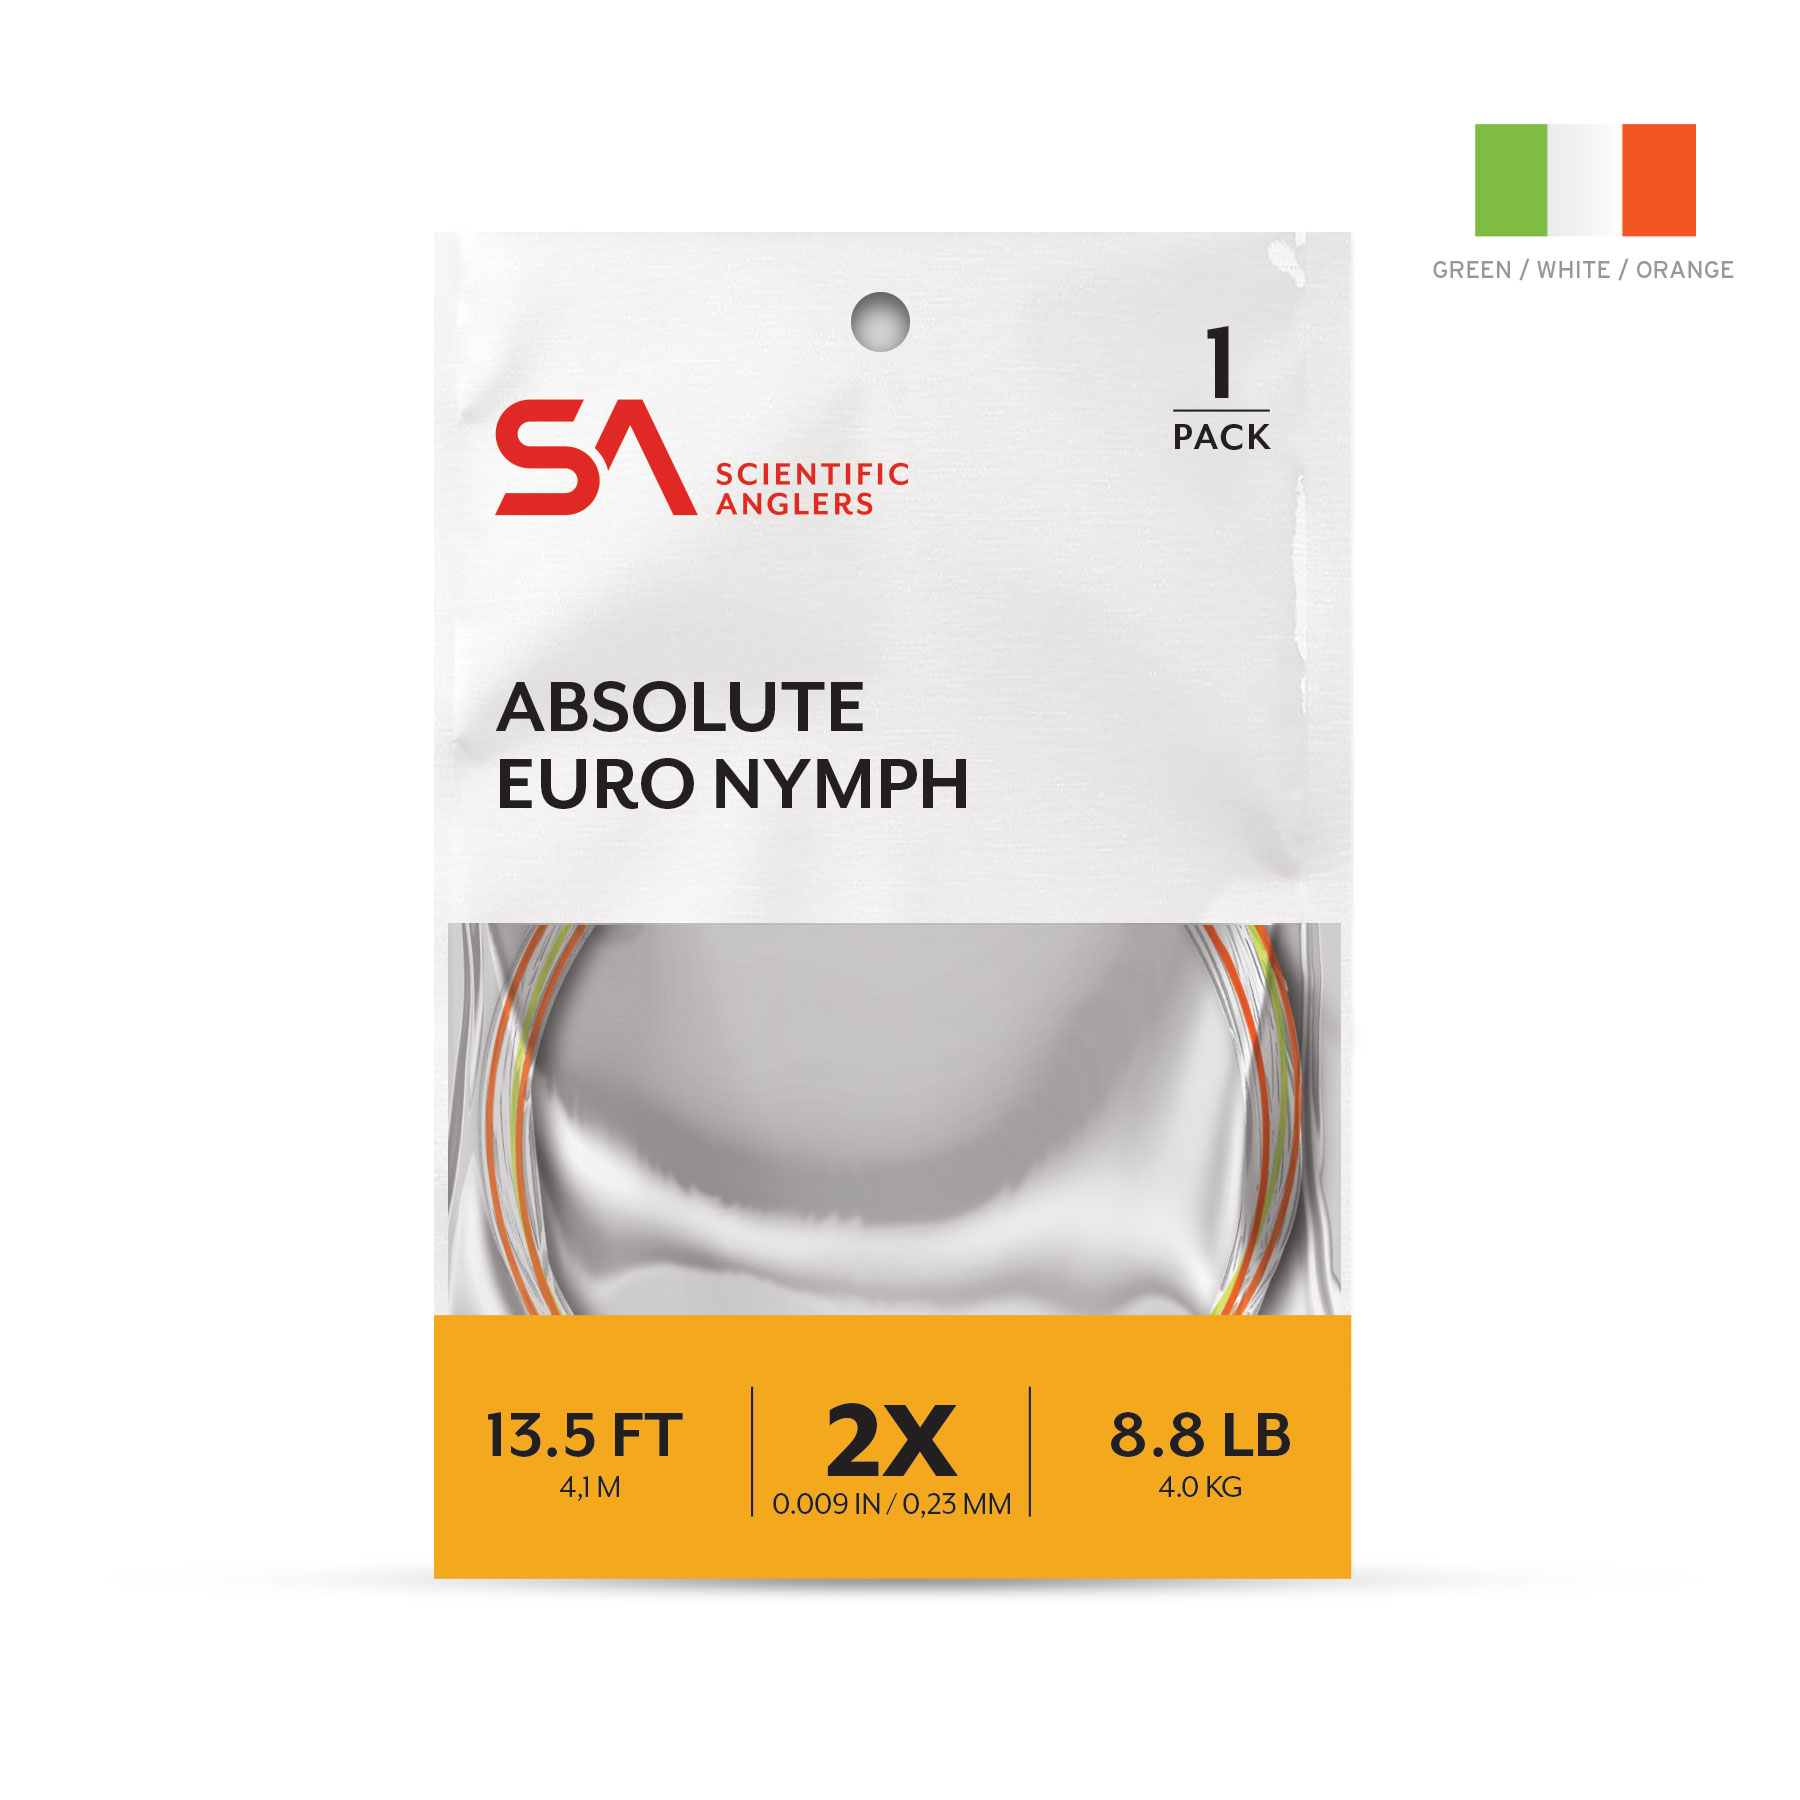 Scientific Anglers Euro Nymph Fly Line Kit